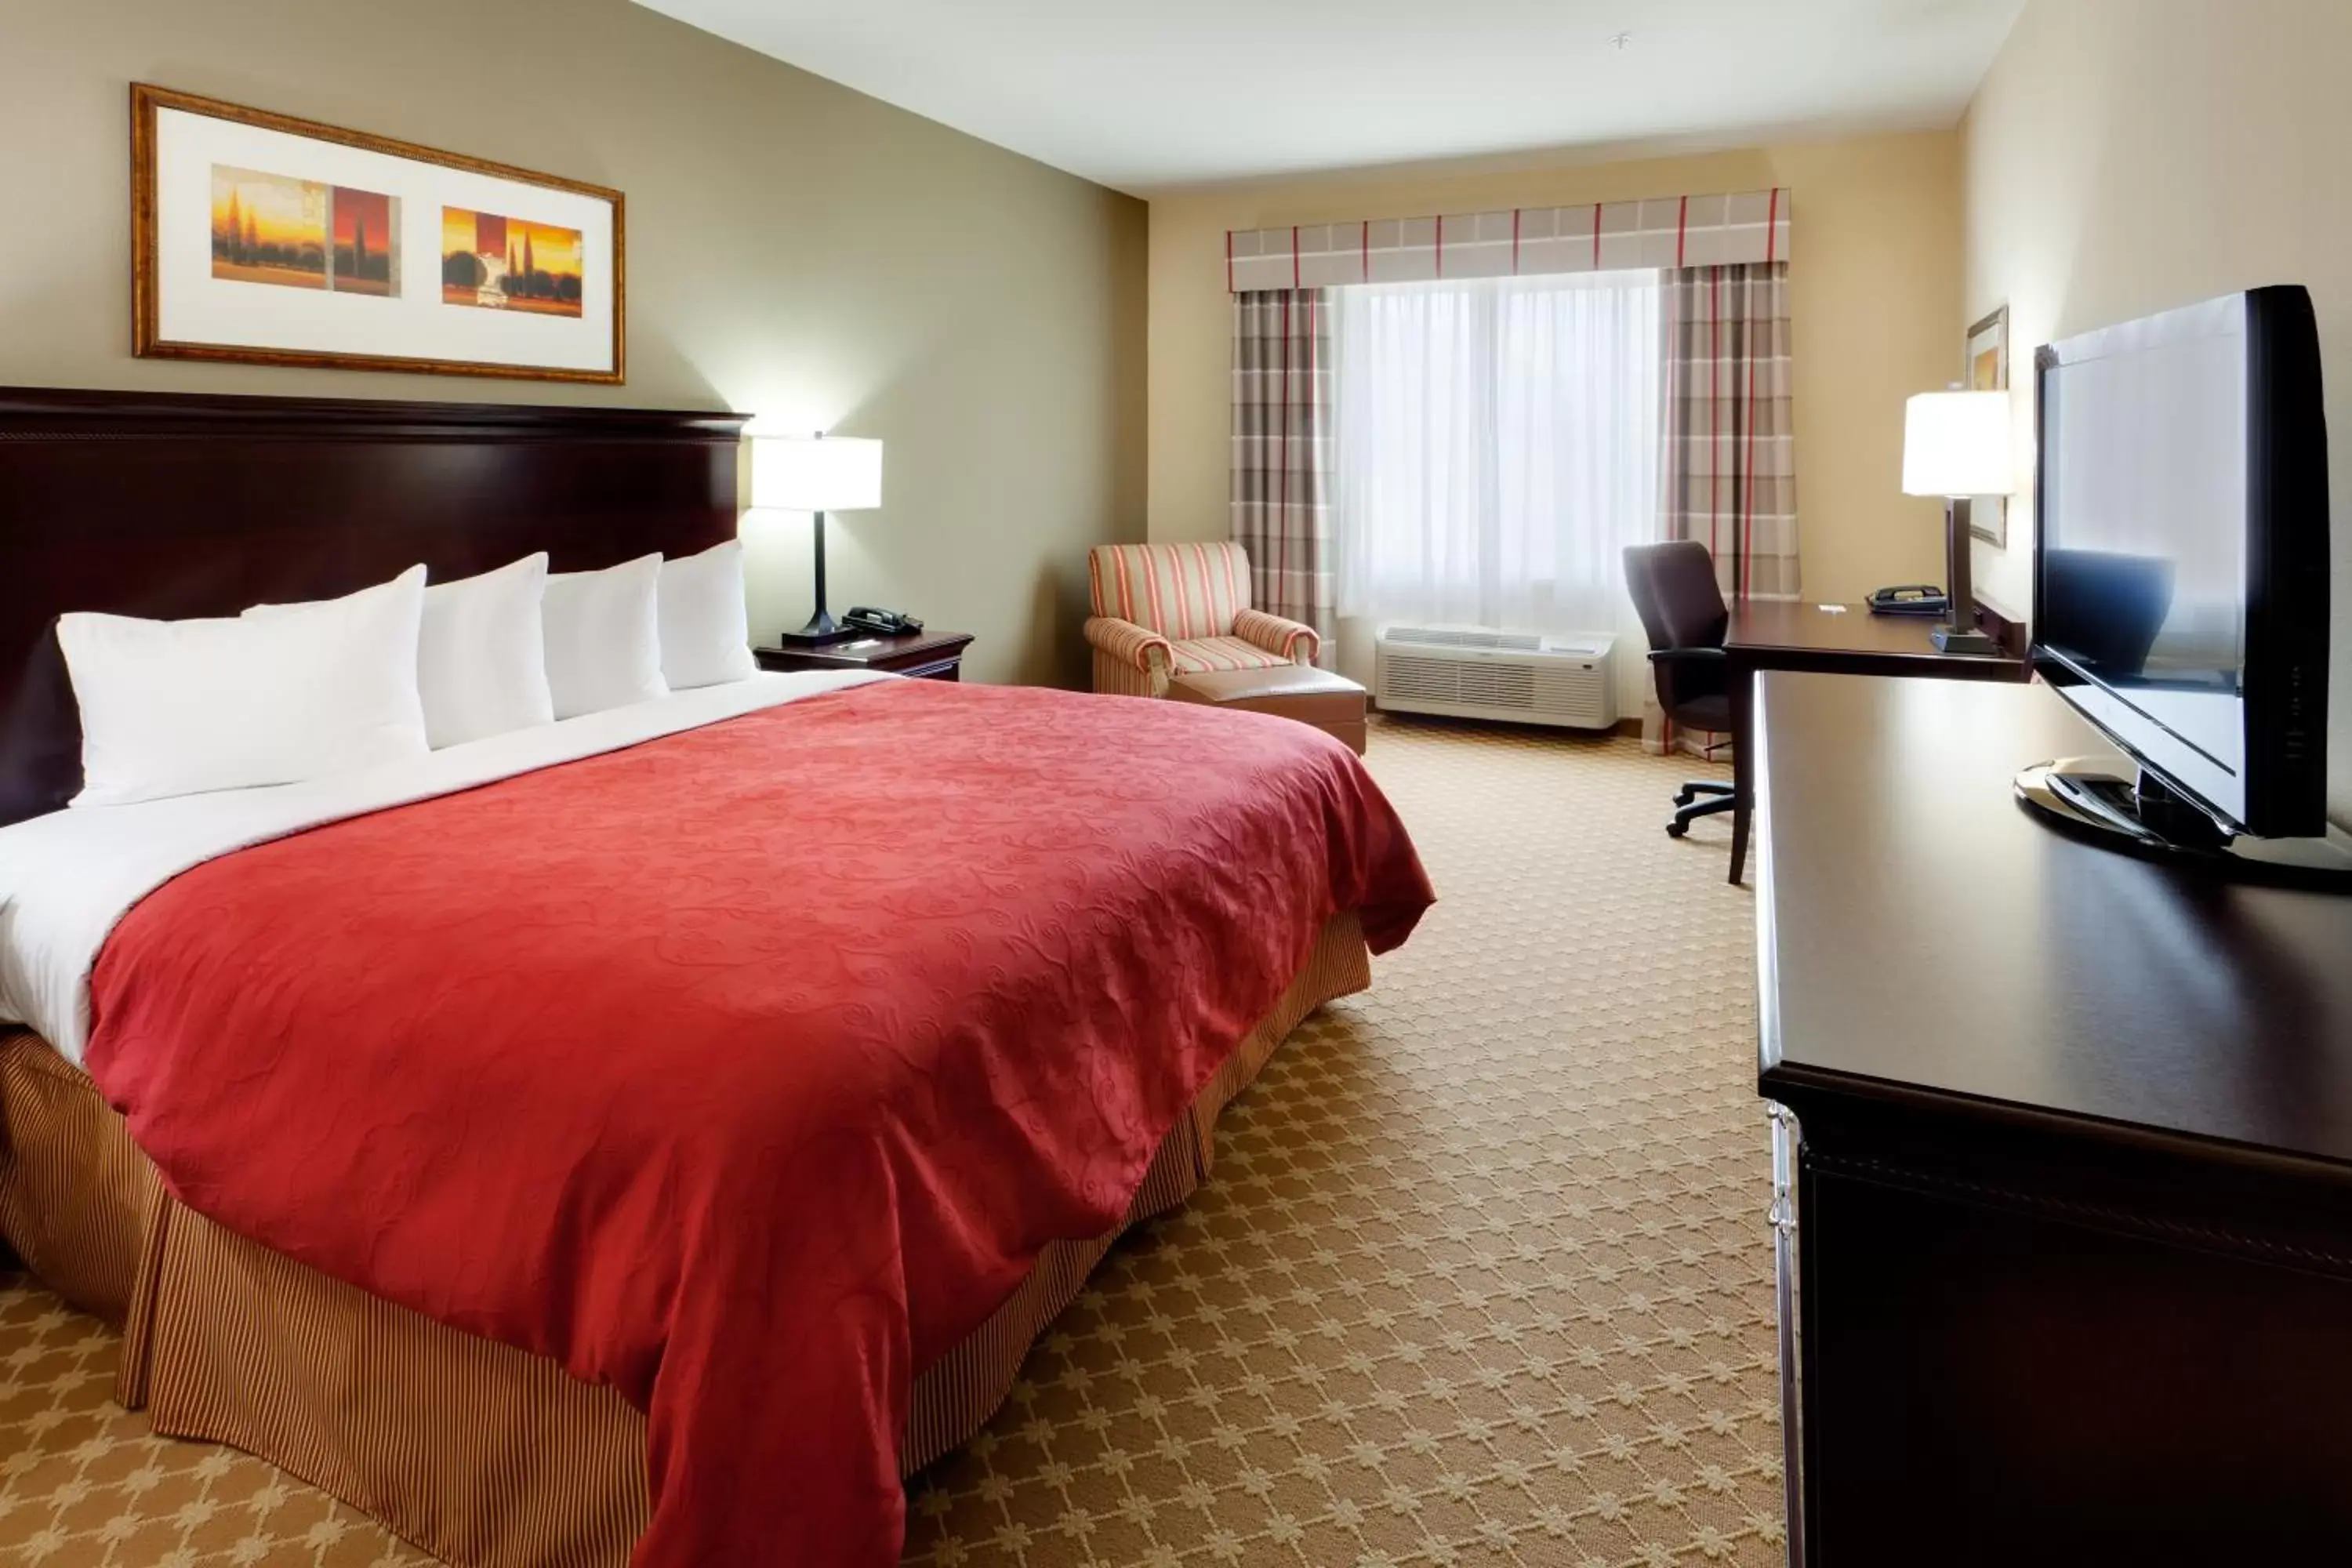 King Suite - Non-Smoking in Country Inn & Suites by Radisson, Lawrenceville, GA